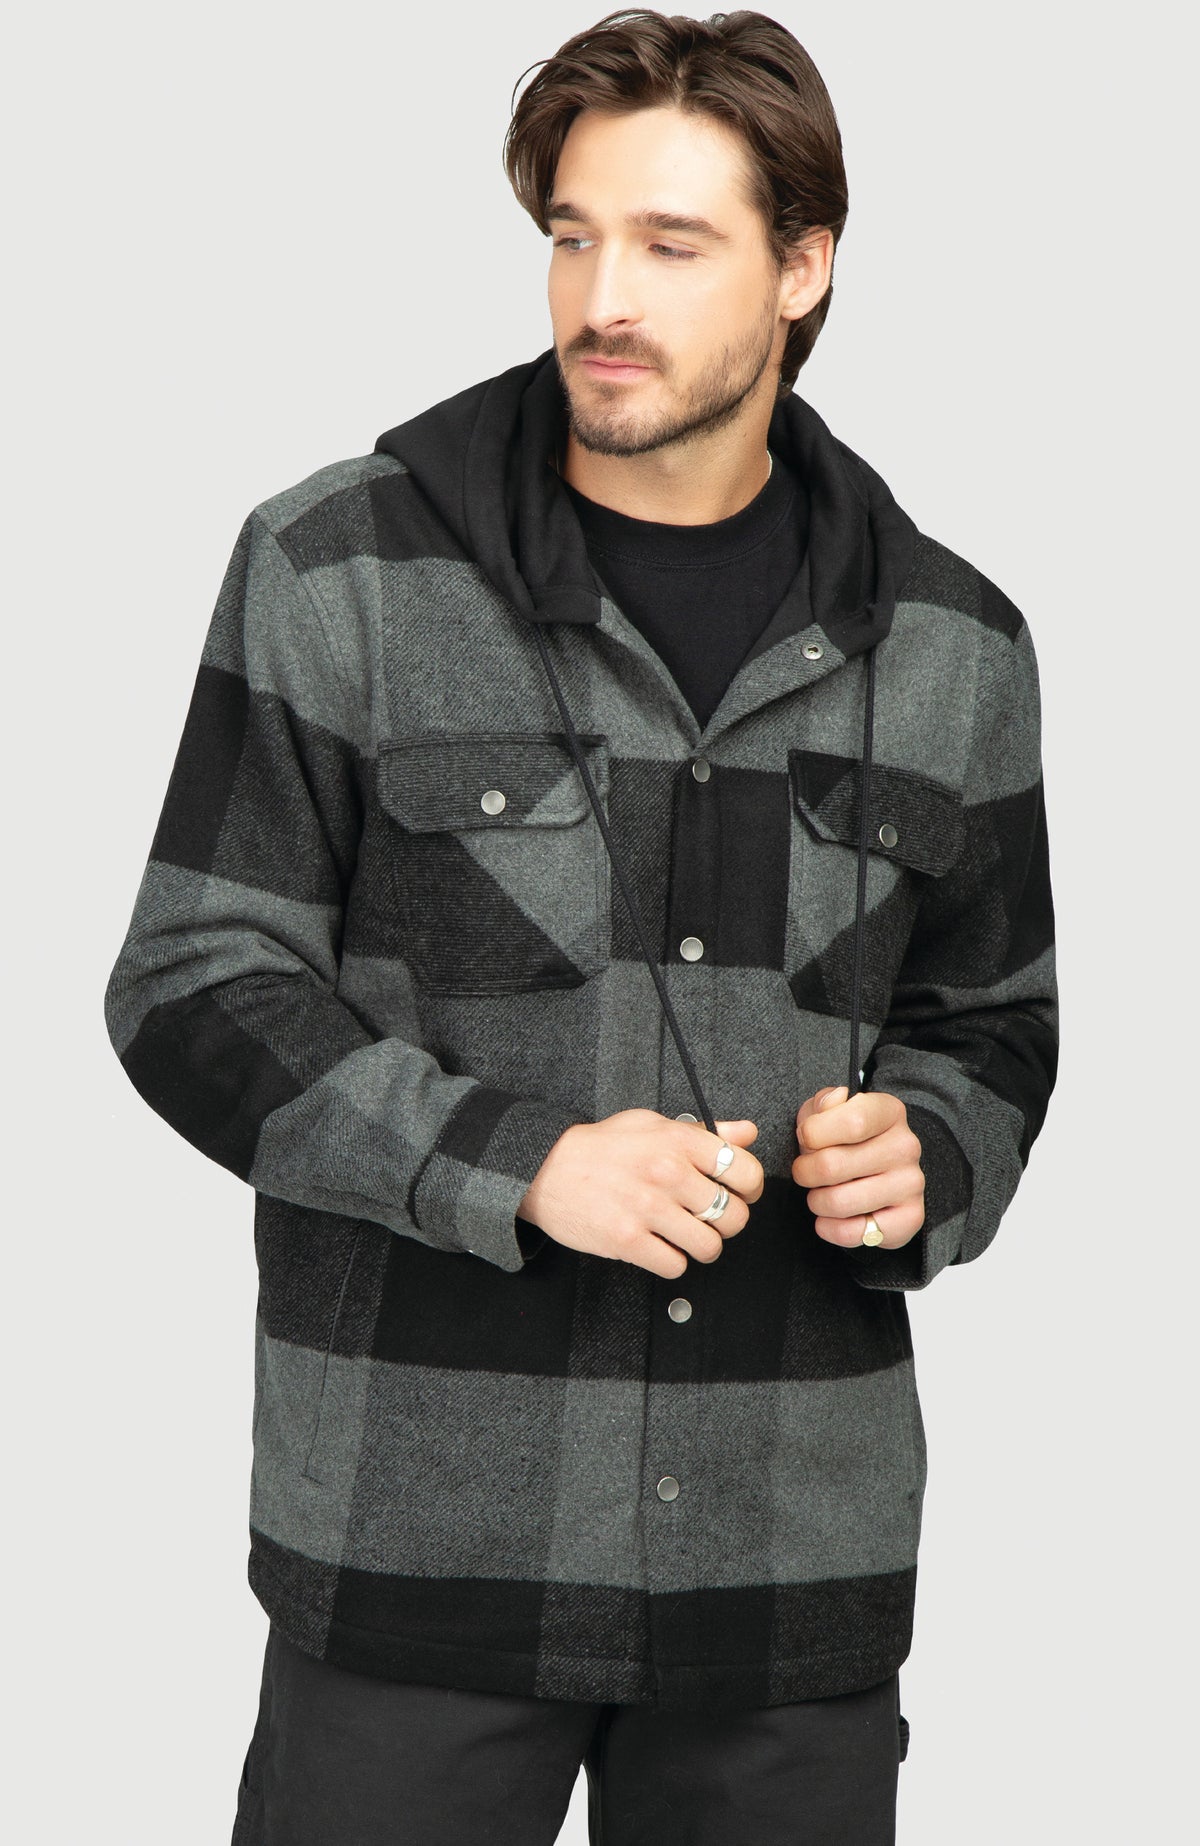 Black Steel Fleece Lined Hooded Plaid Shacket - Front Buttoned Up